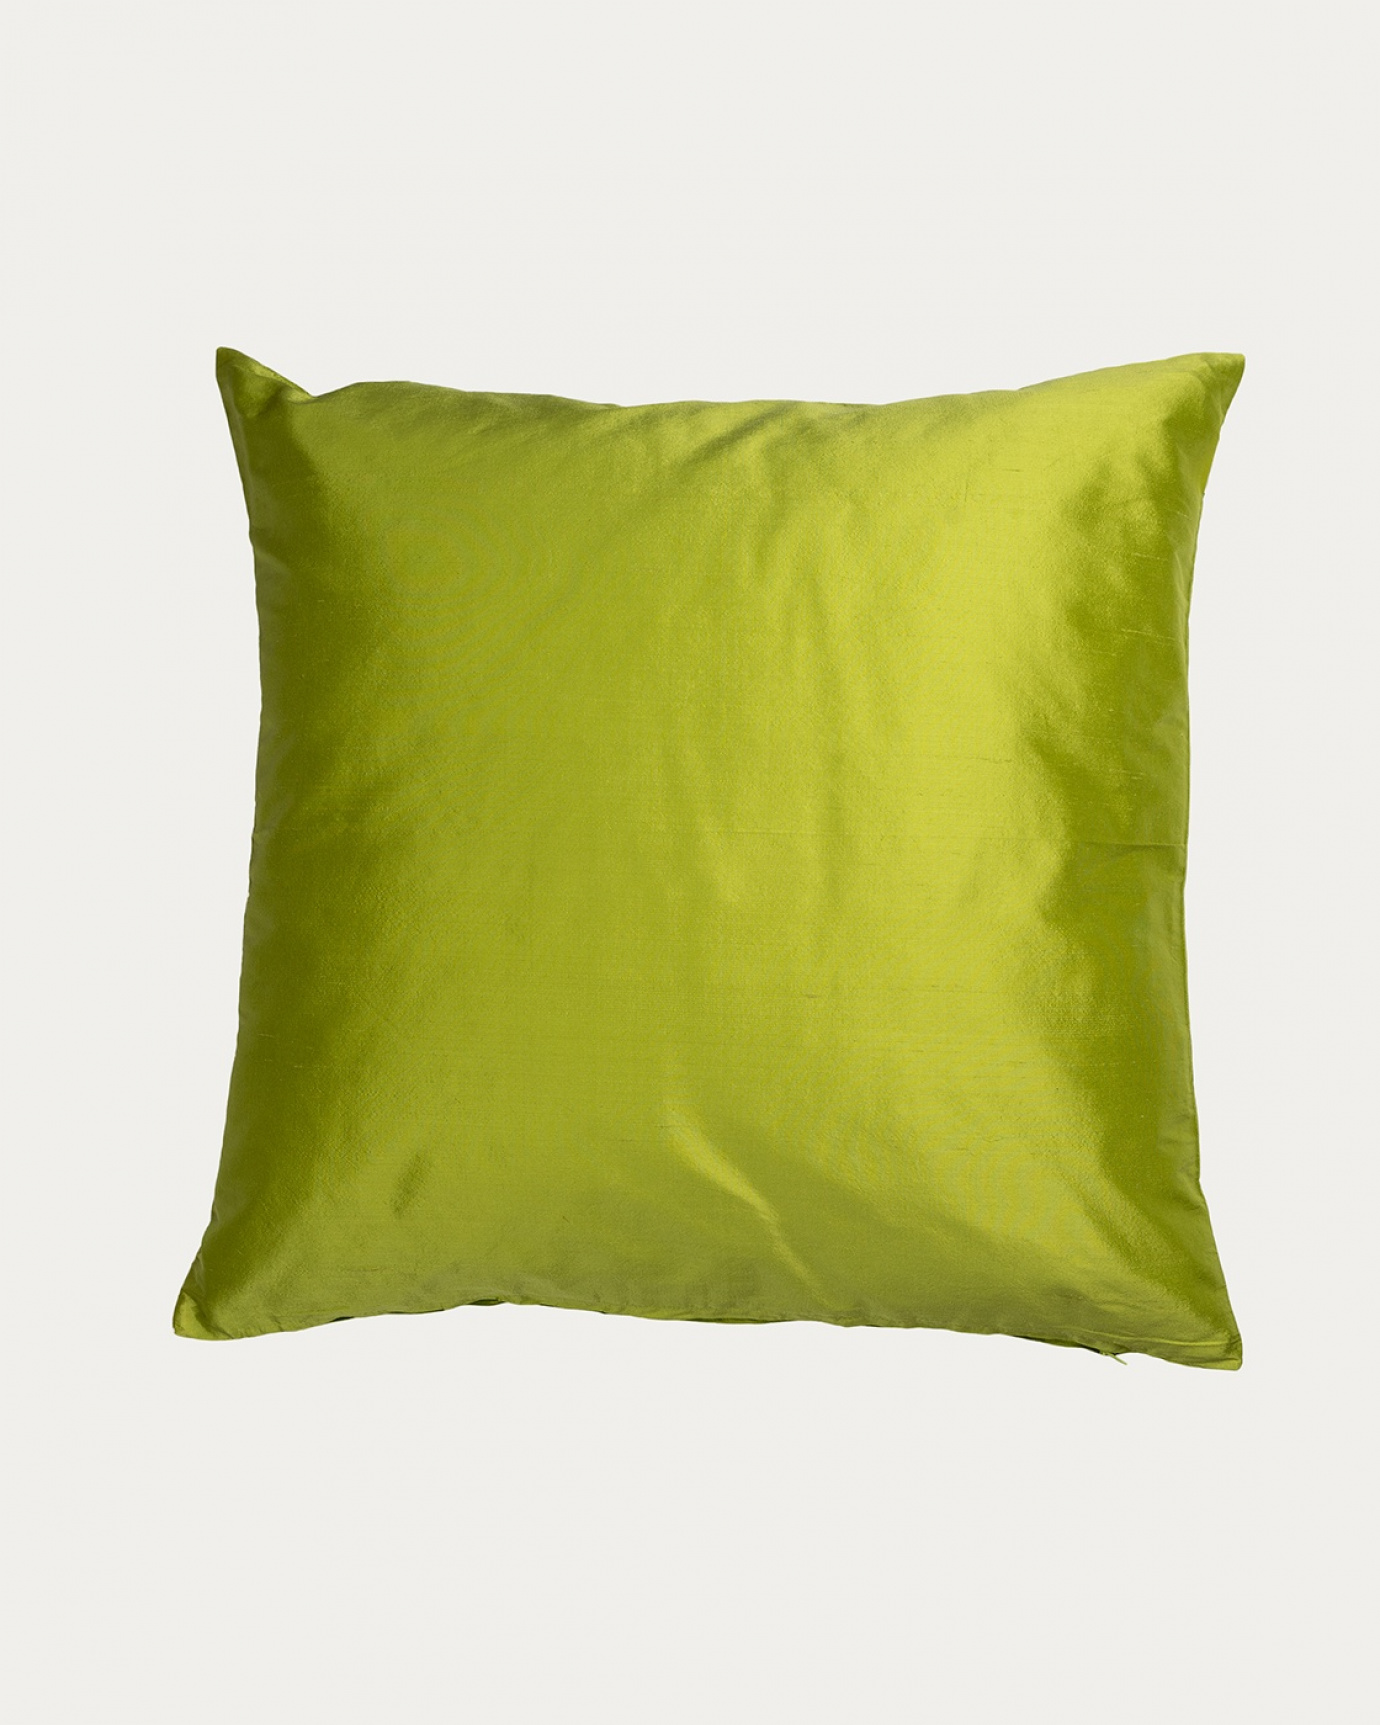 Product image apple green SILK cushion cover made of 100% dupion silk that gives a nice lustre from LINUM DESIGN. Size 50x50 cm.